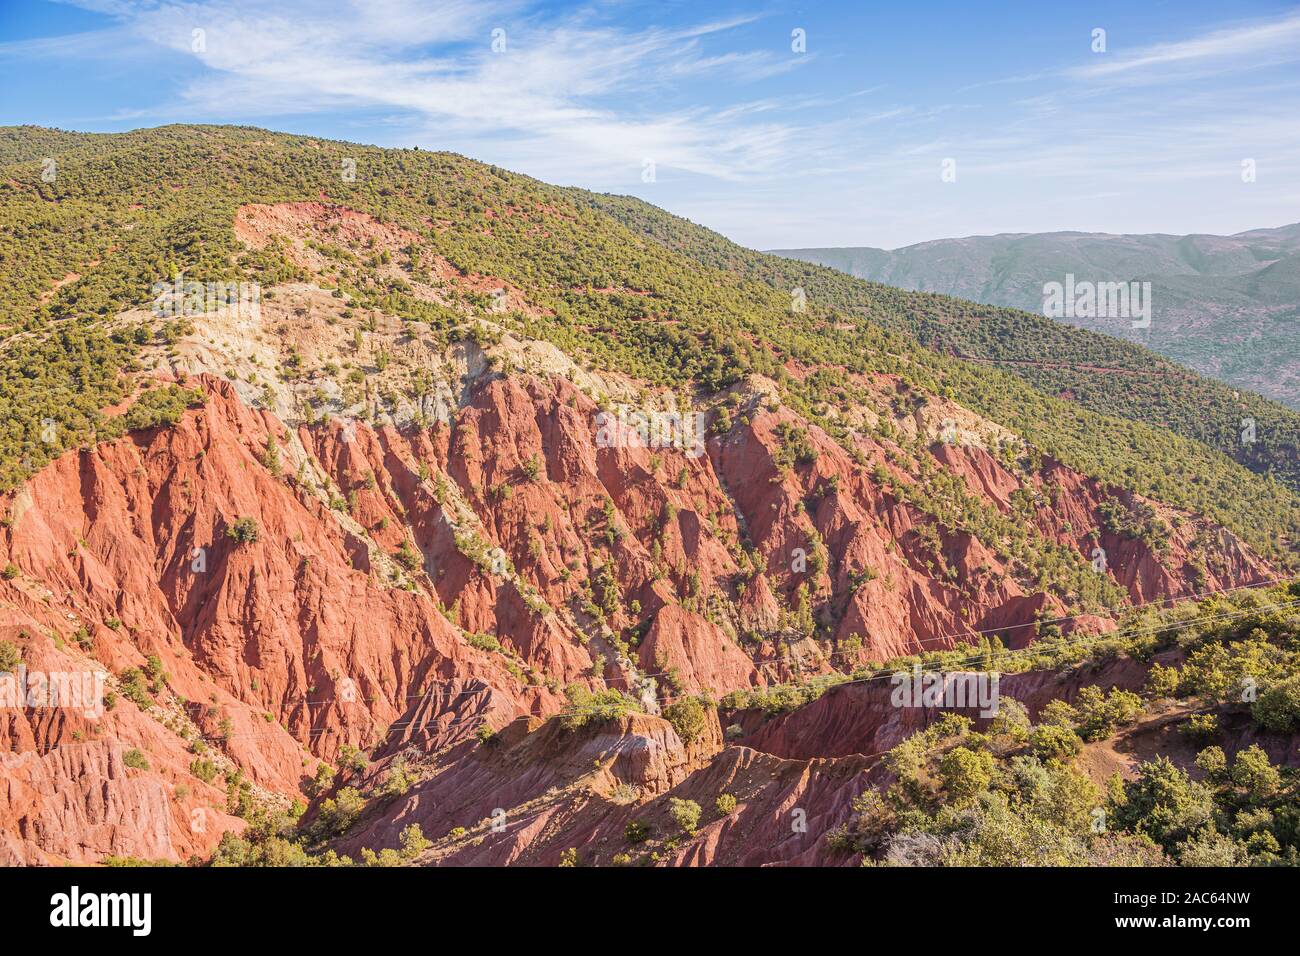 View of Tagargoust forest on National Road 9 from Marrakech to Ouarzazate Stock Photo